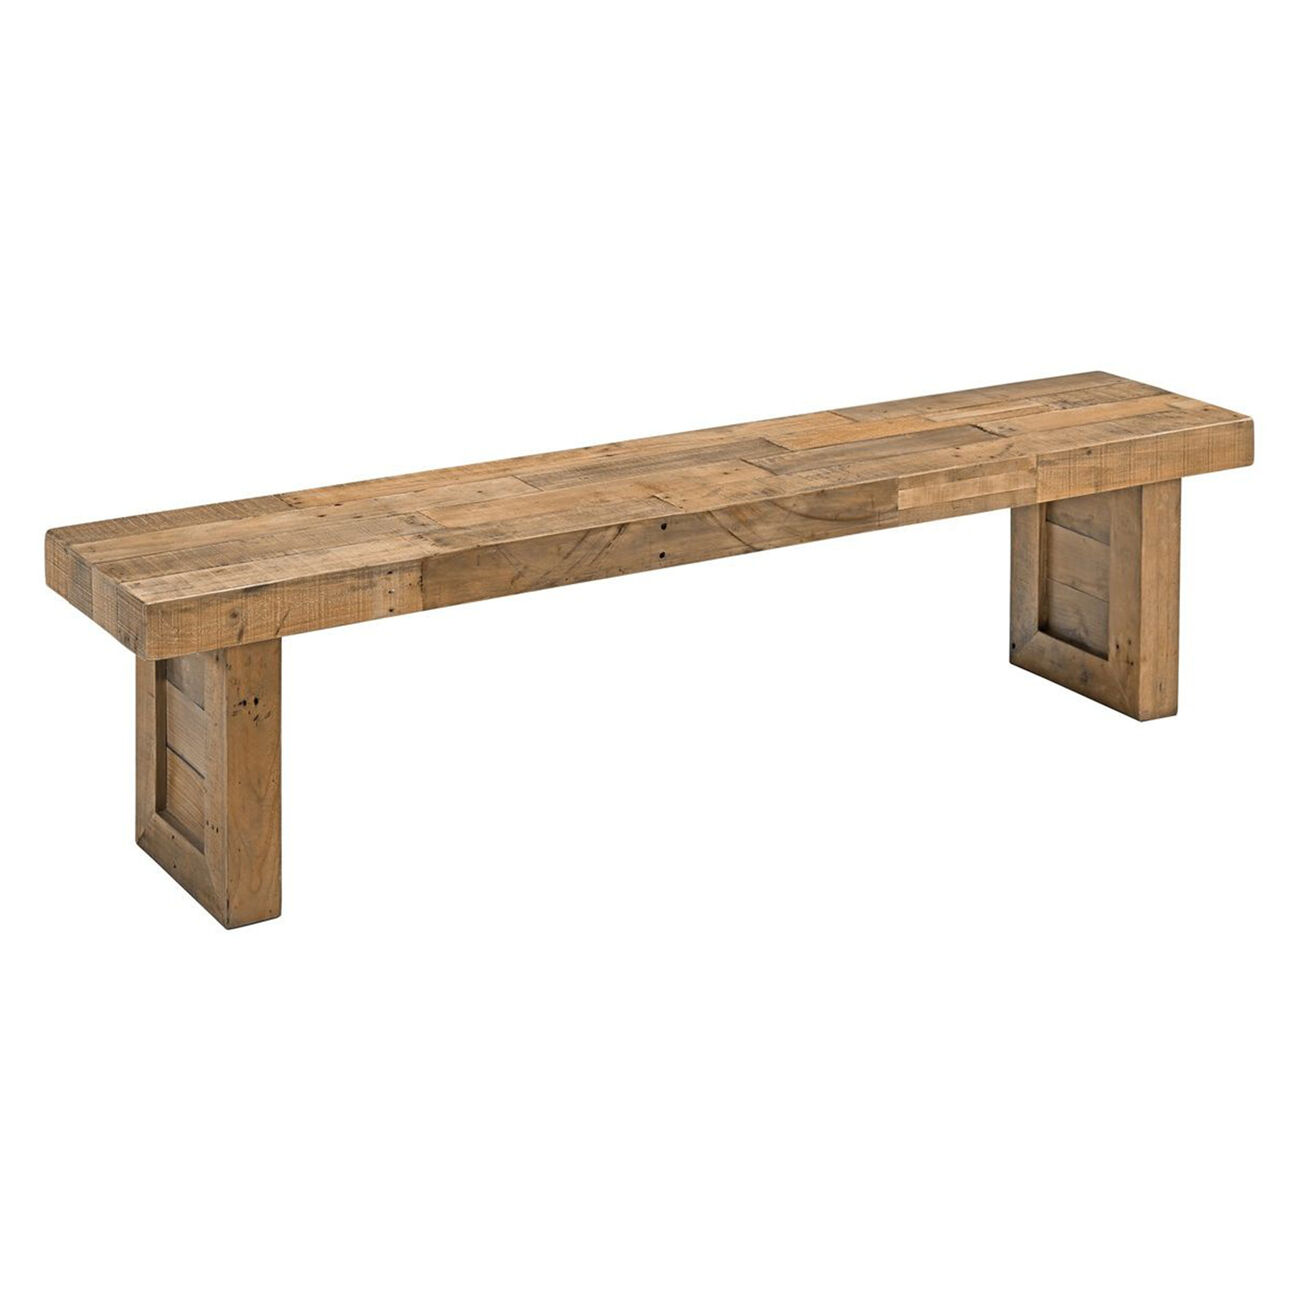 Rectangular Reclaimed Wood Bench with Sled Base, Distressed Brown